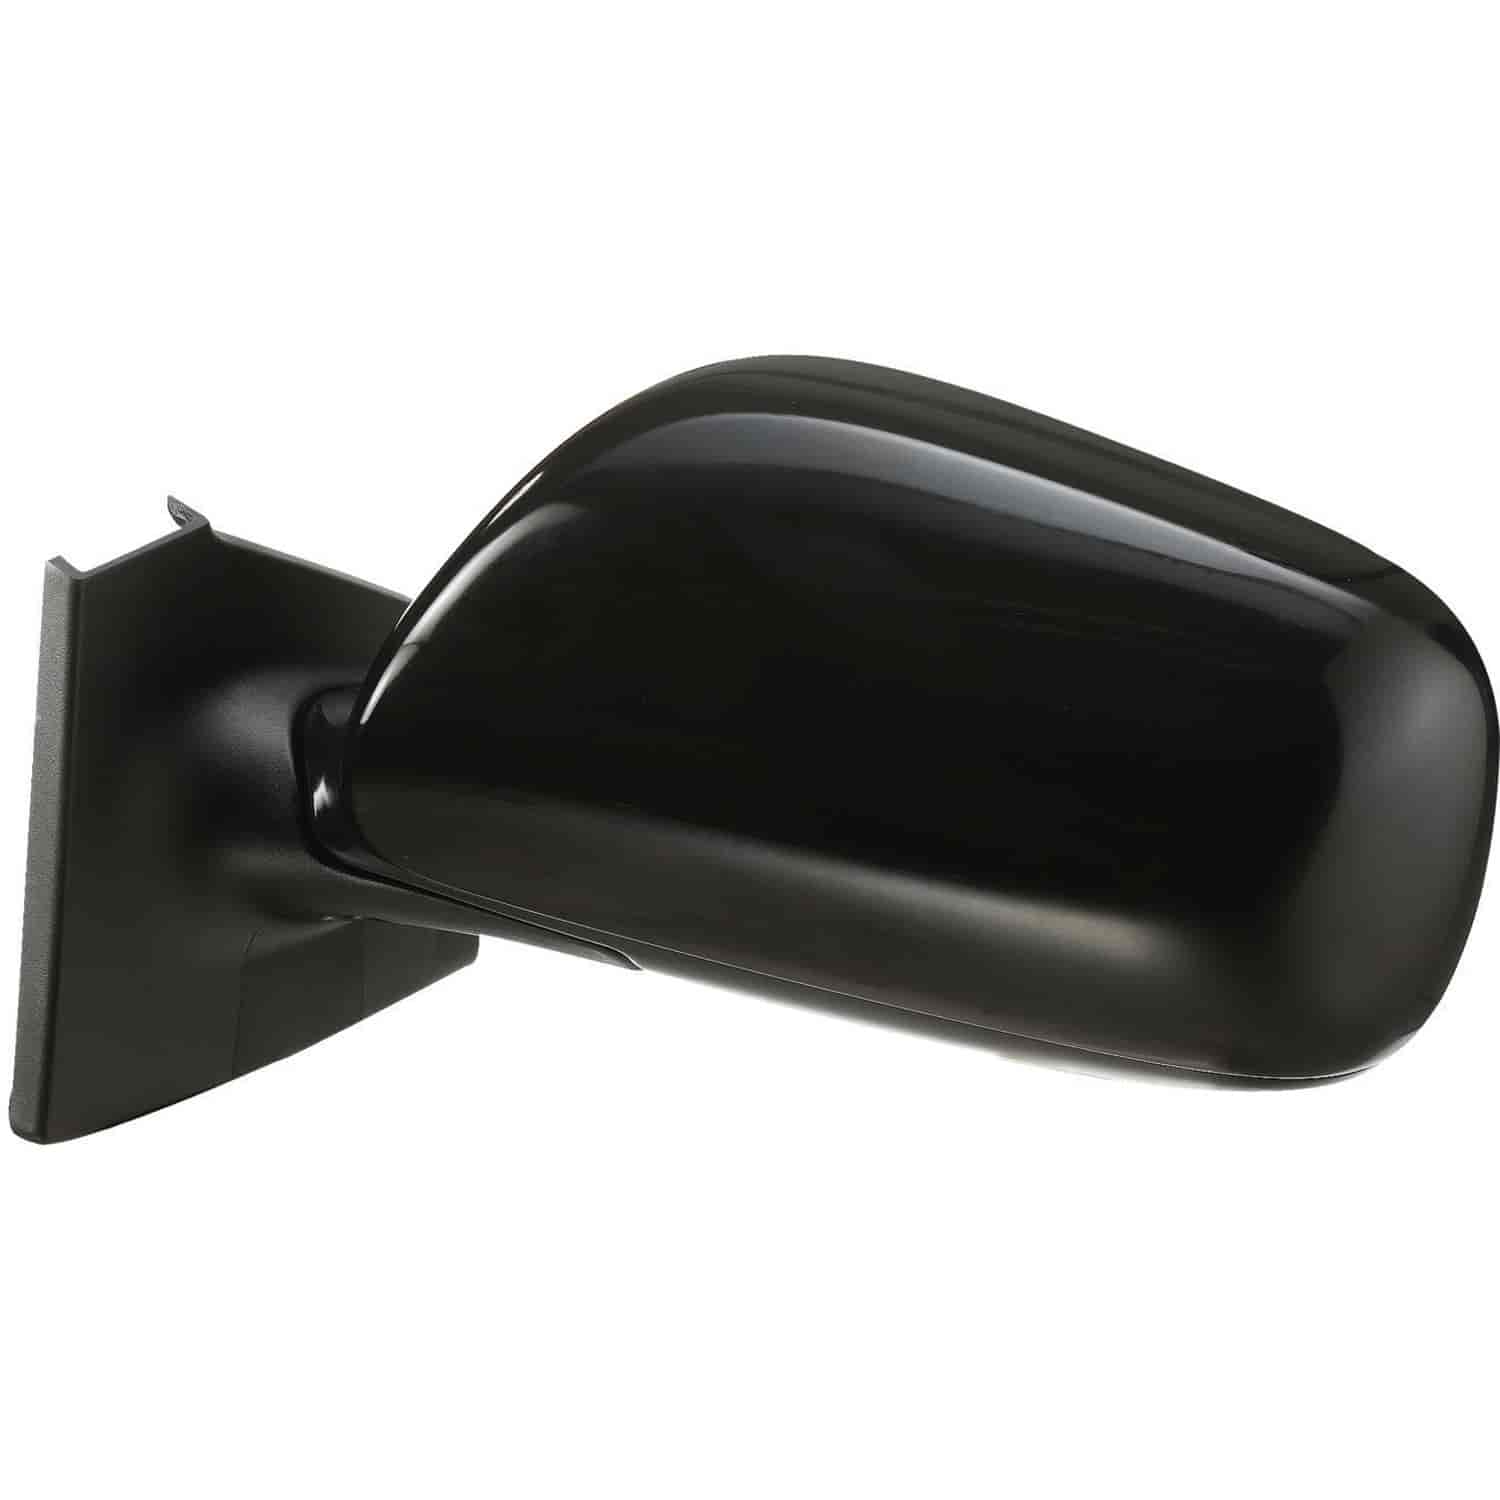 OEM Style Replacement mirror for 07-11 Toyota Yaris